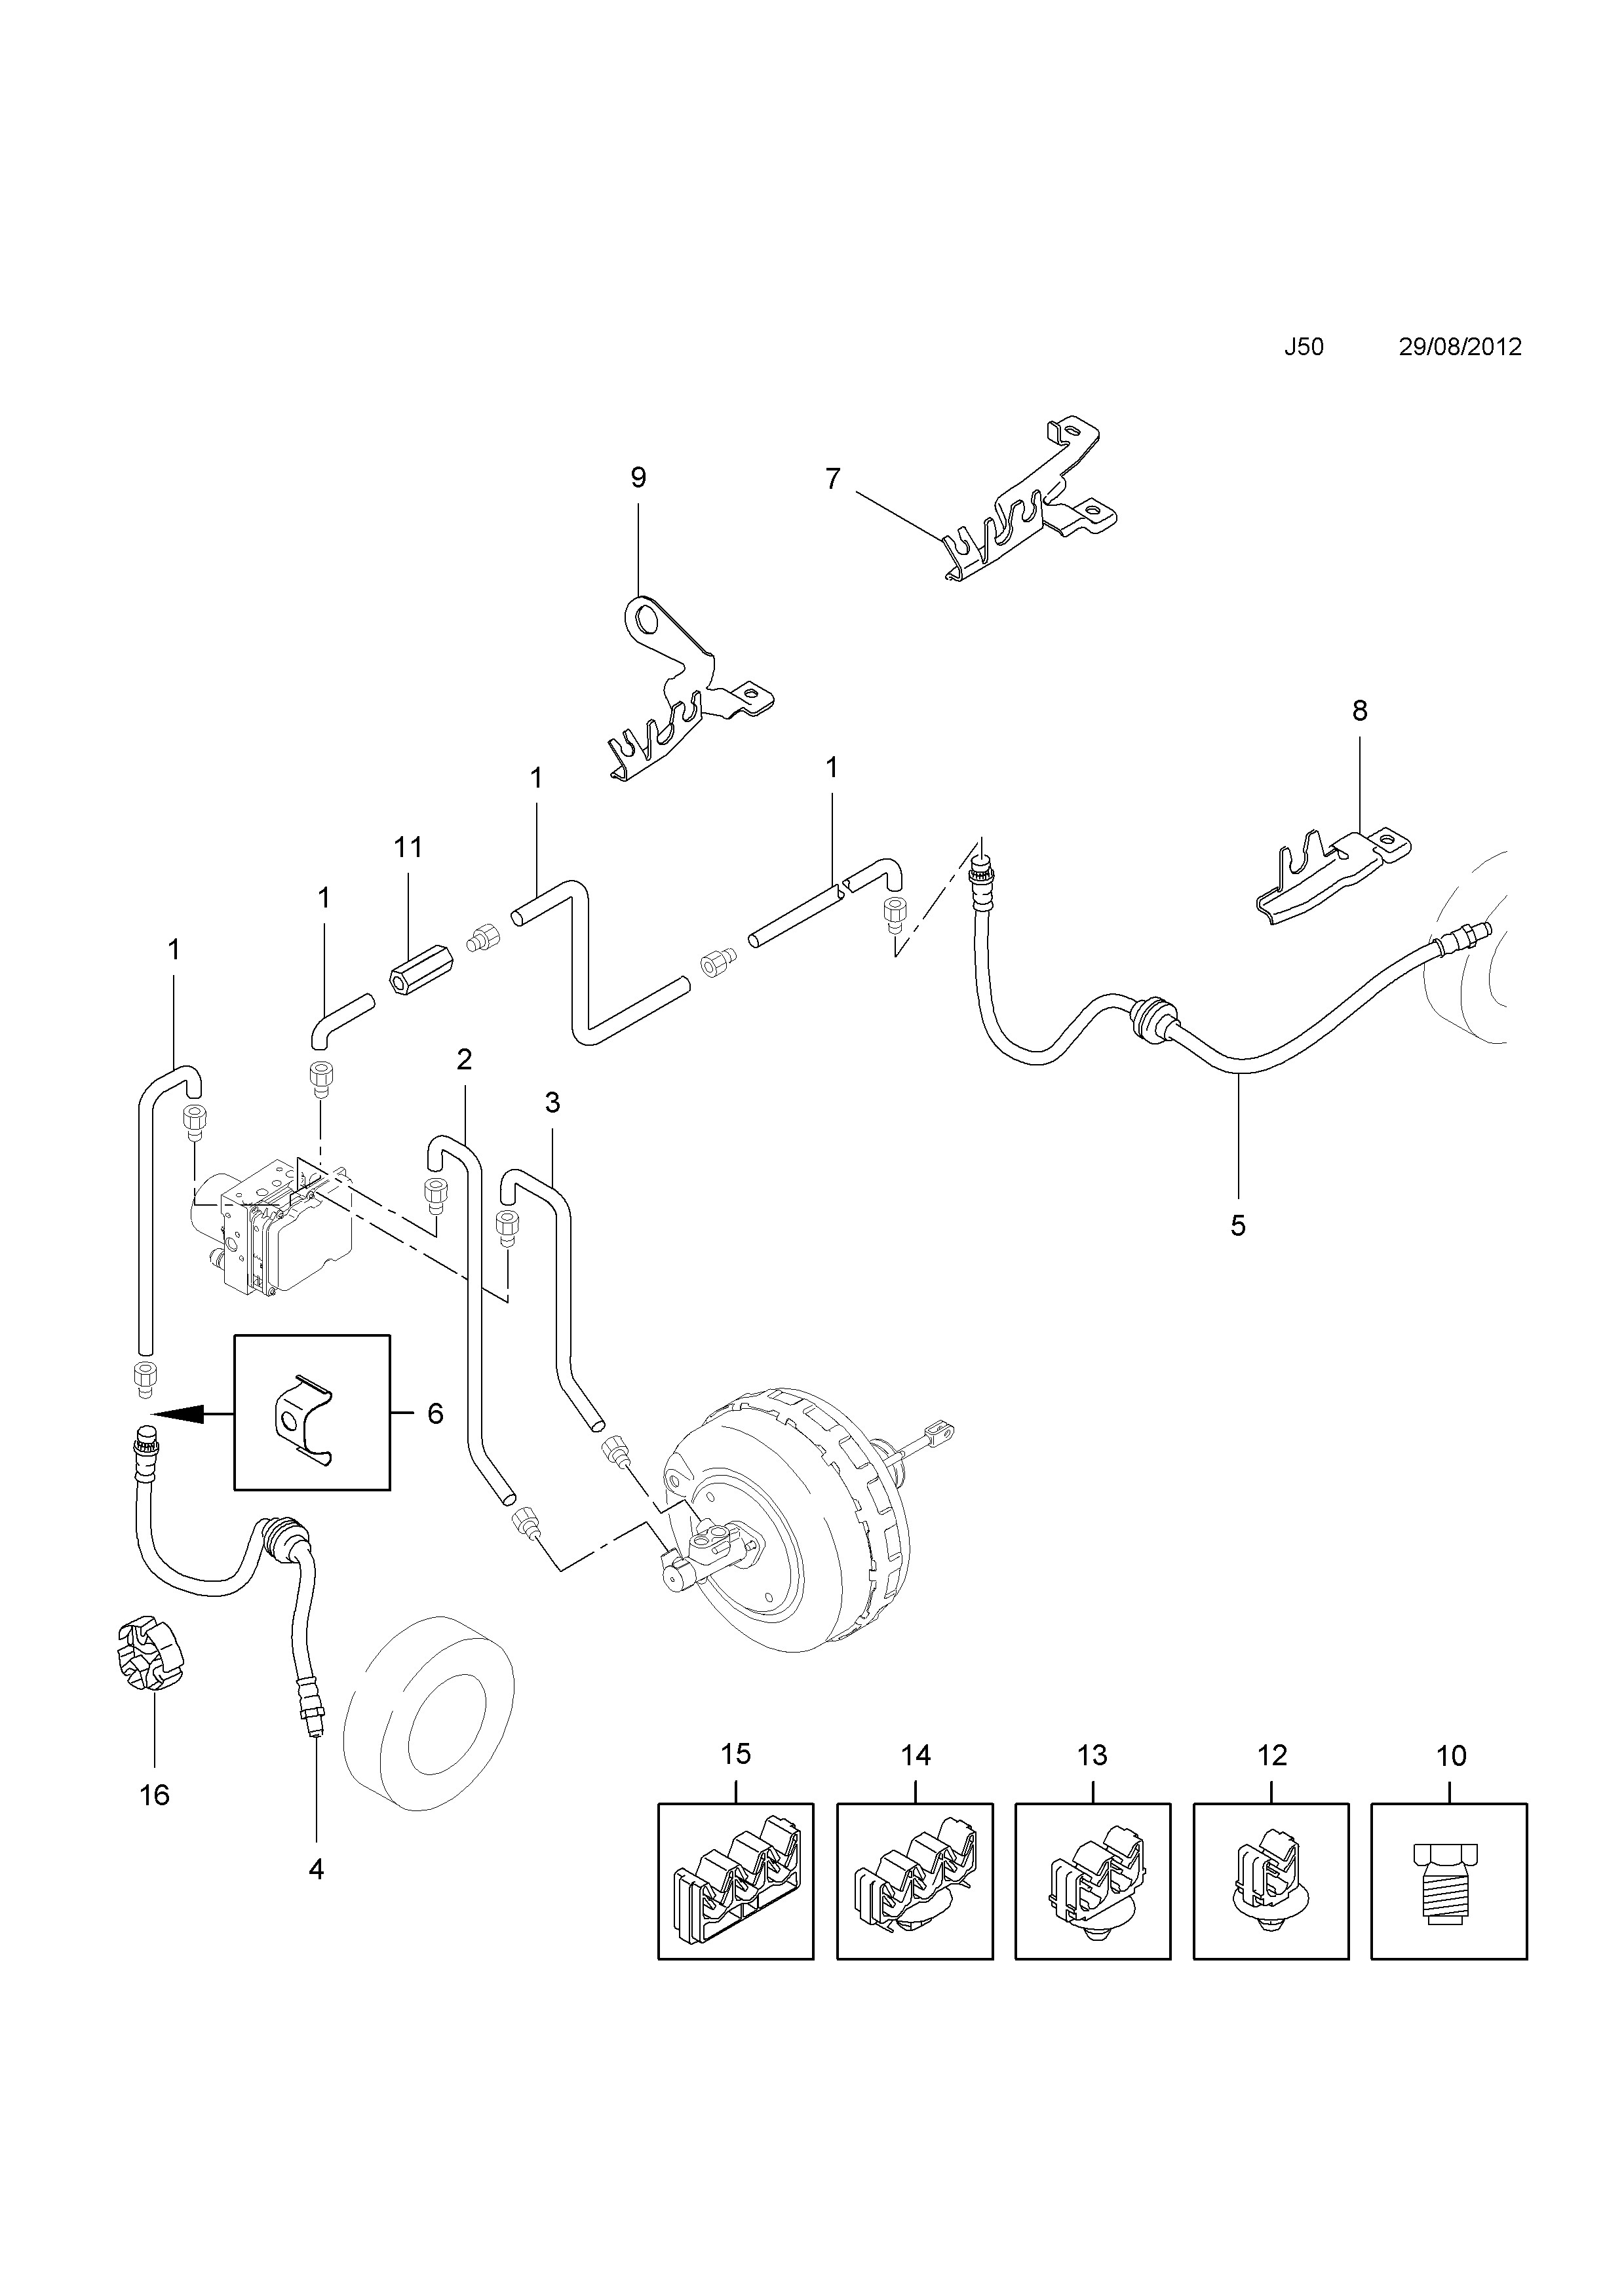 Gm Master Cylinder Diagram Opel Movano B 2010 J Brakes 6 Brake Pipes and Hoses Catcar Of Gm Master Cylinder Diagram